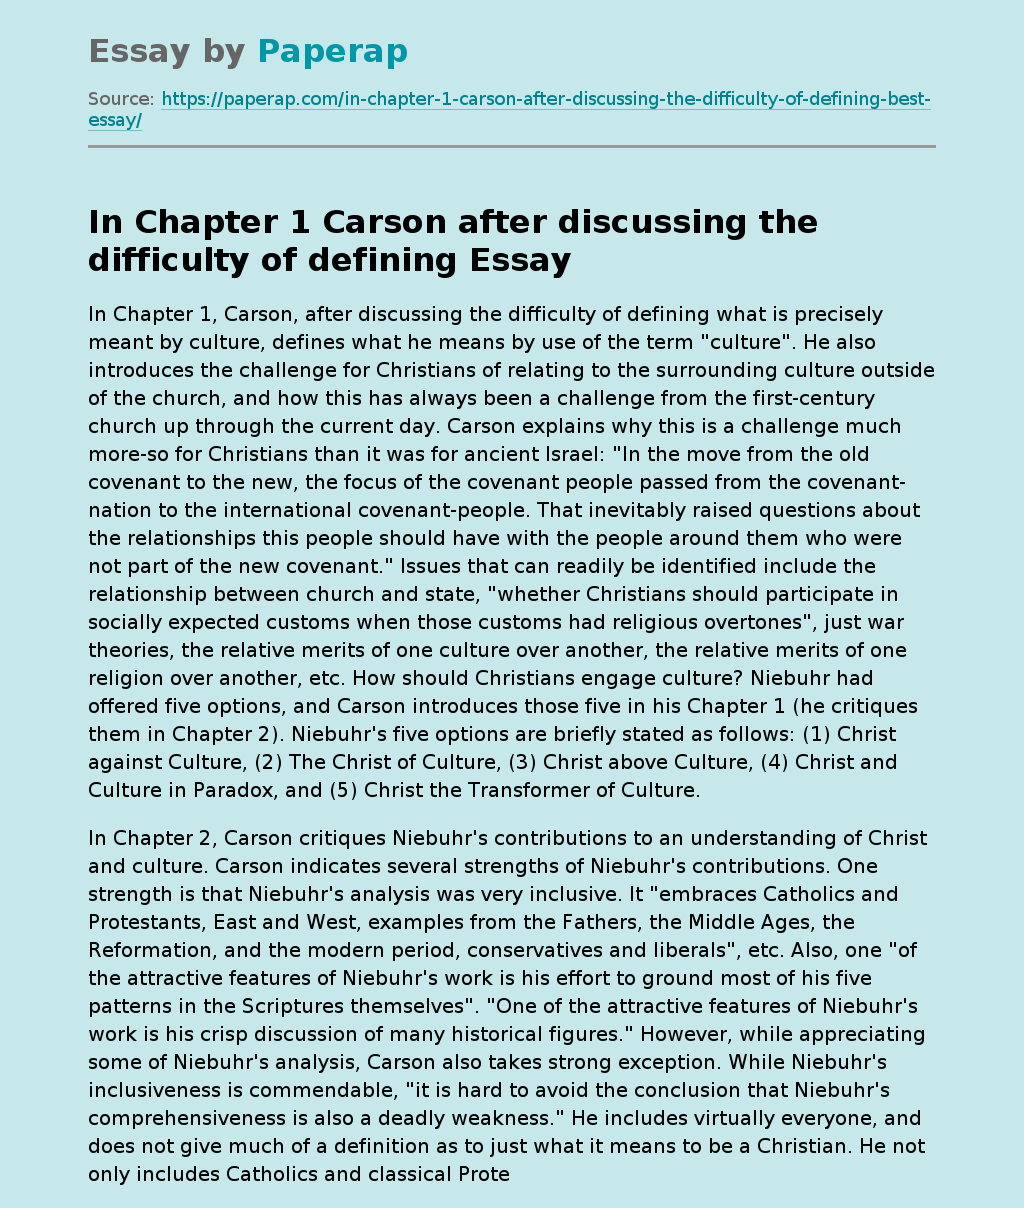 In Chapter 1 Carson after discussing the difficulty of defining